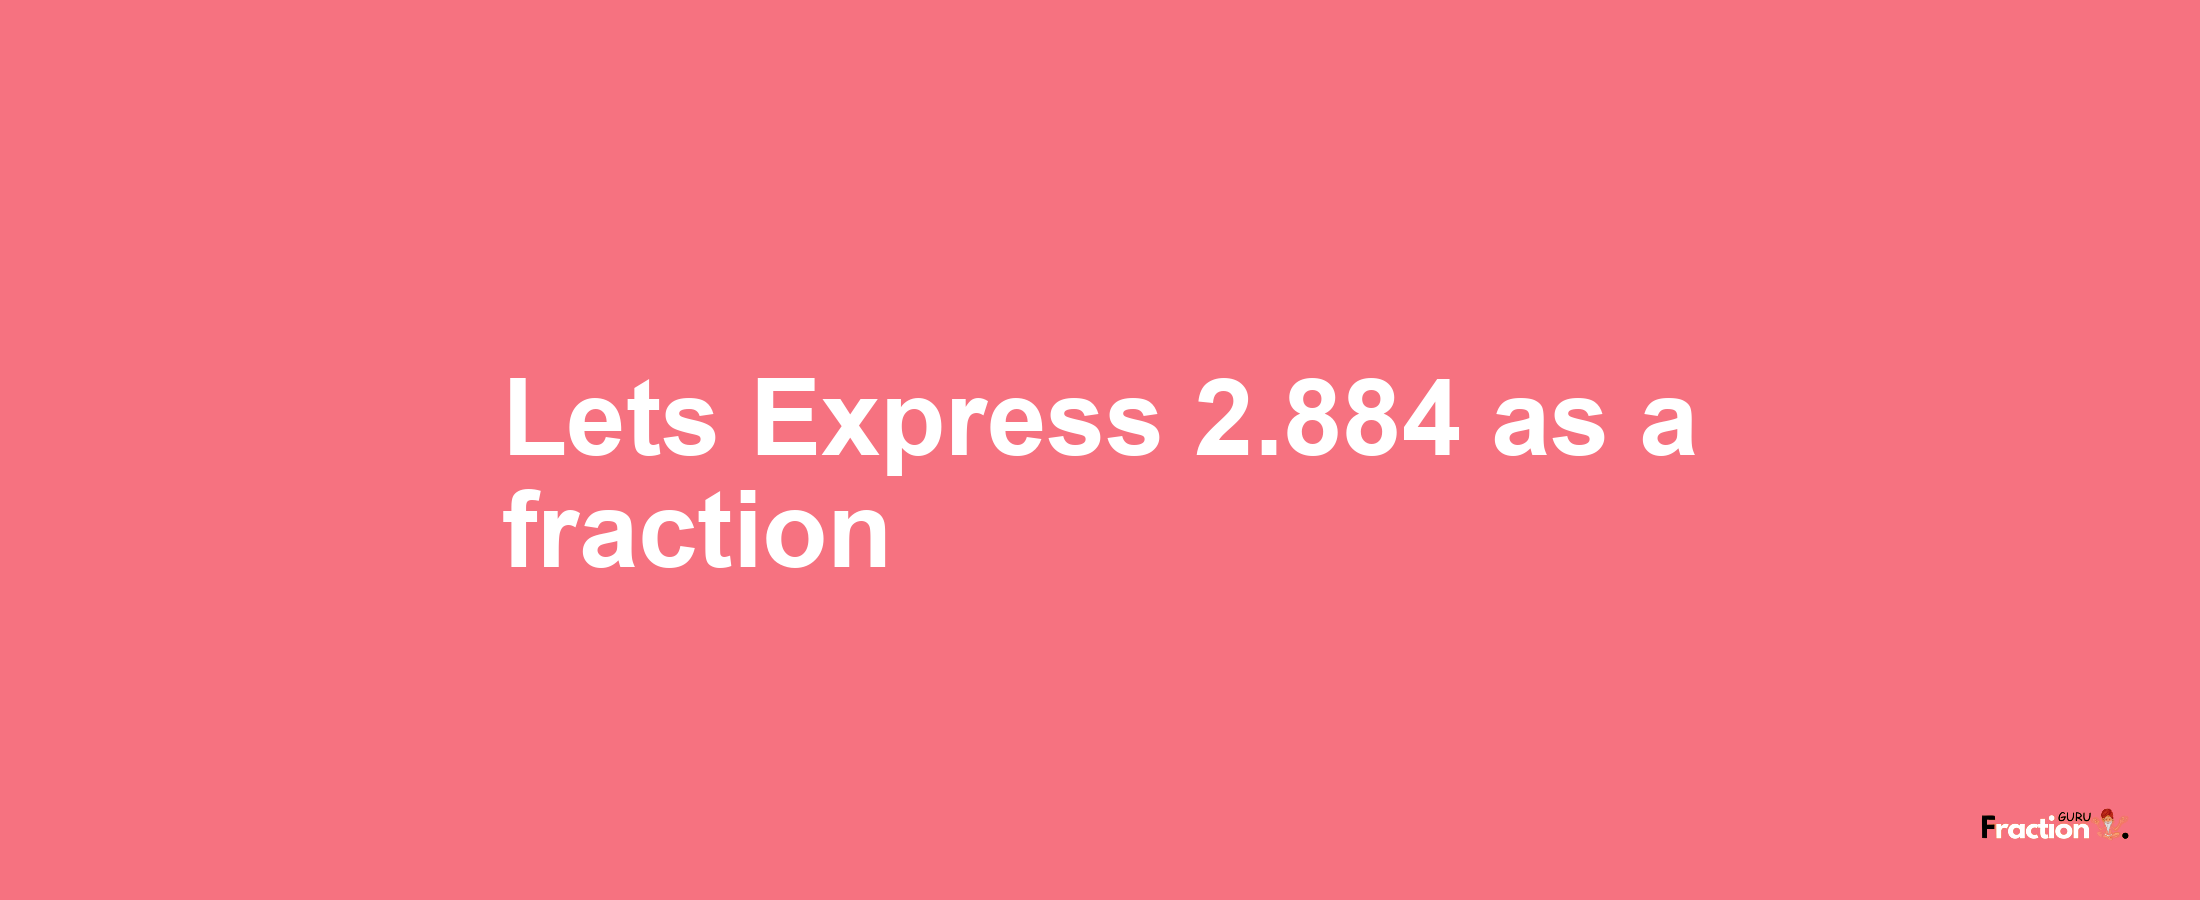 Lets Express 2.884 as afraction